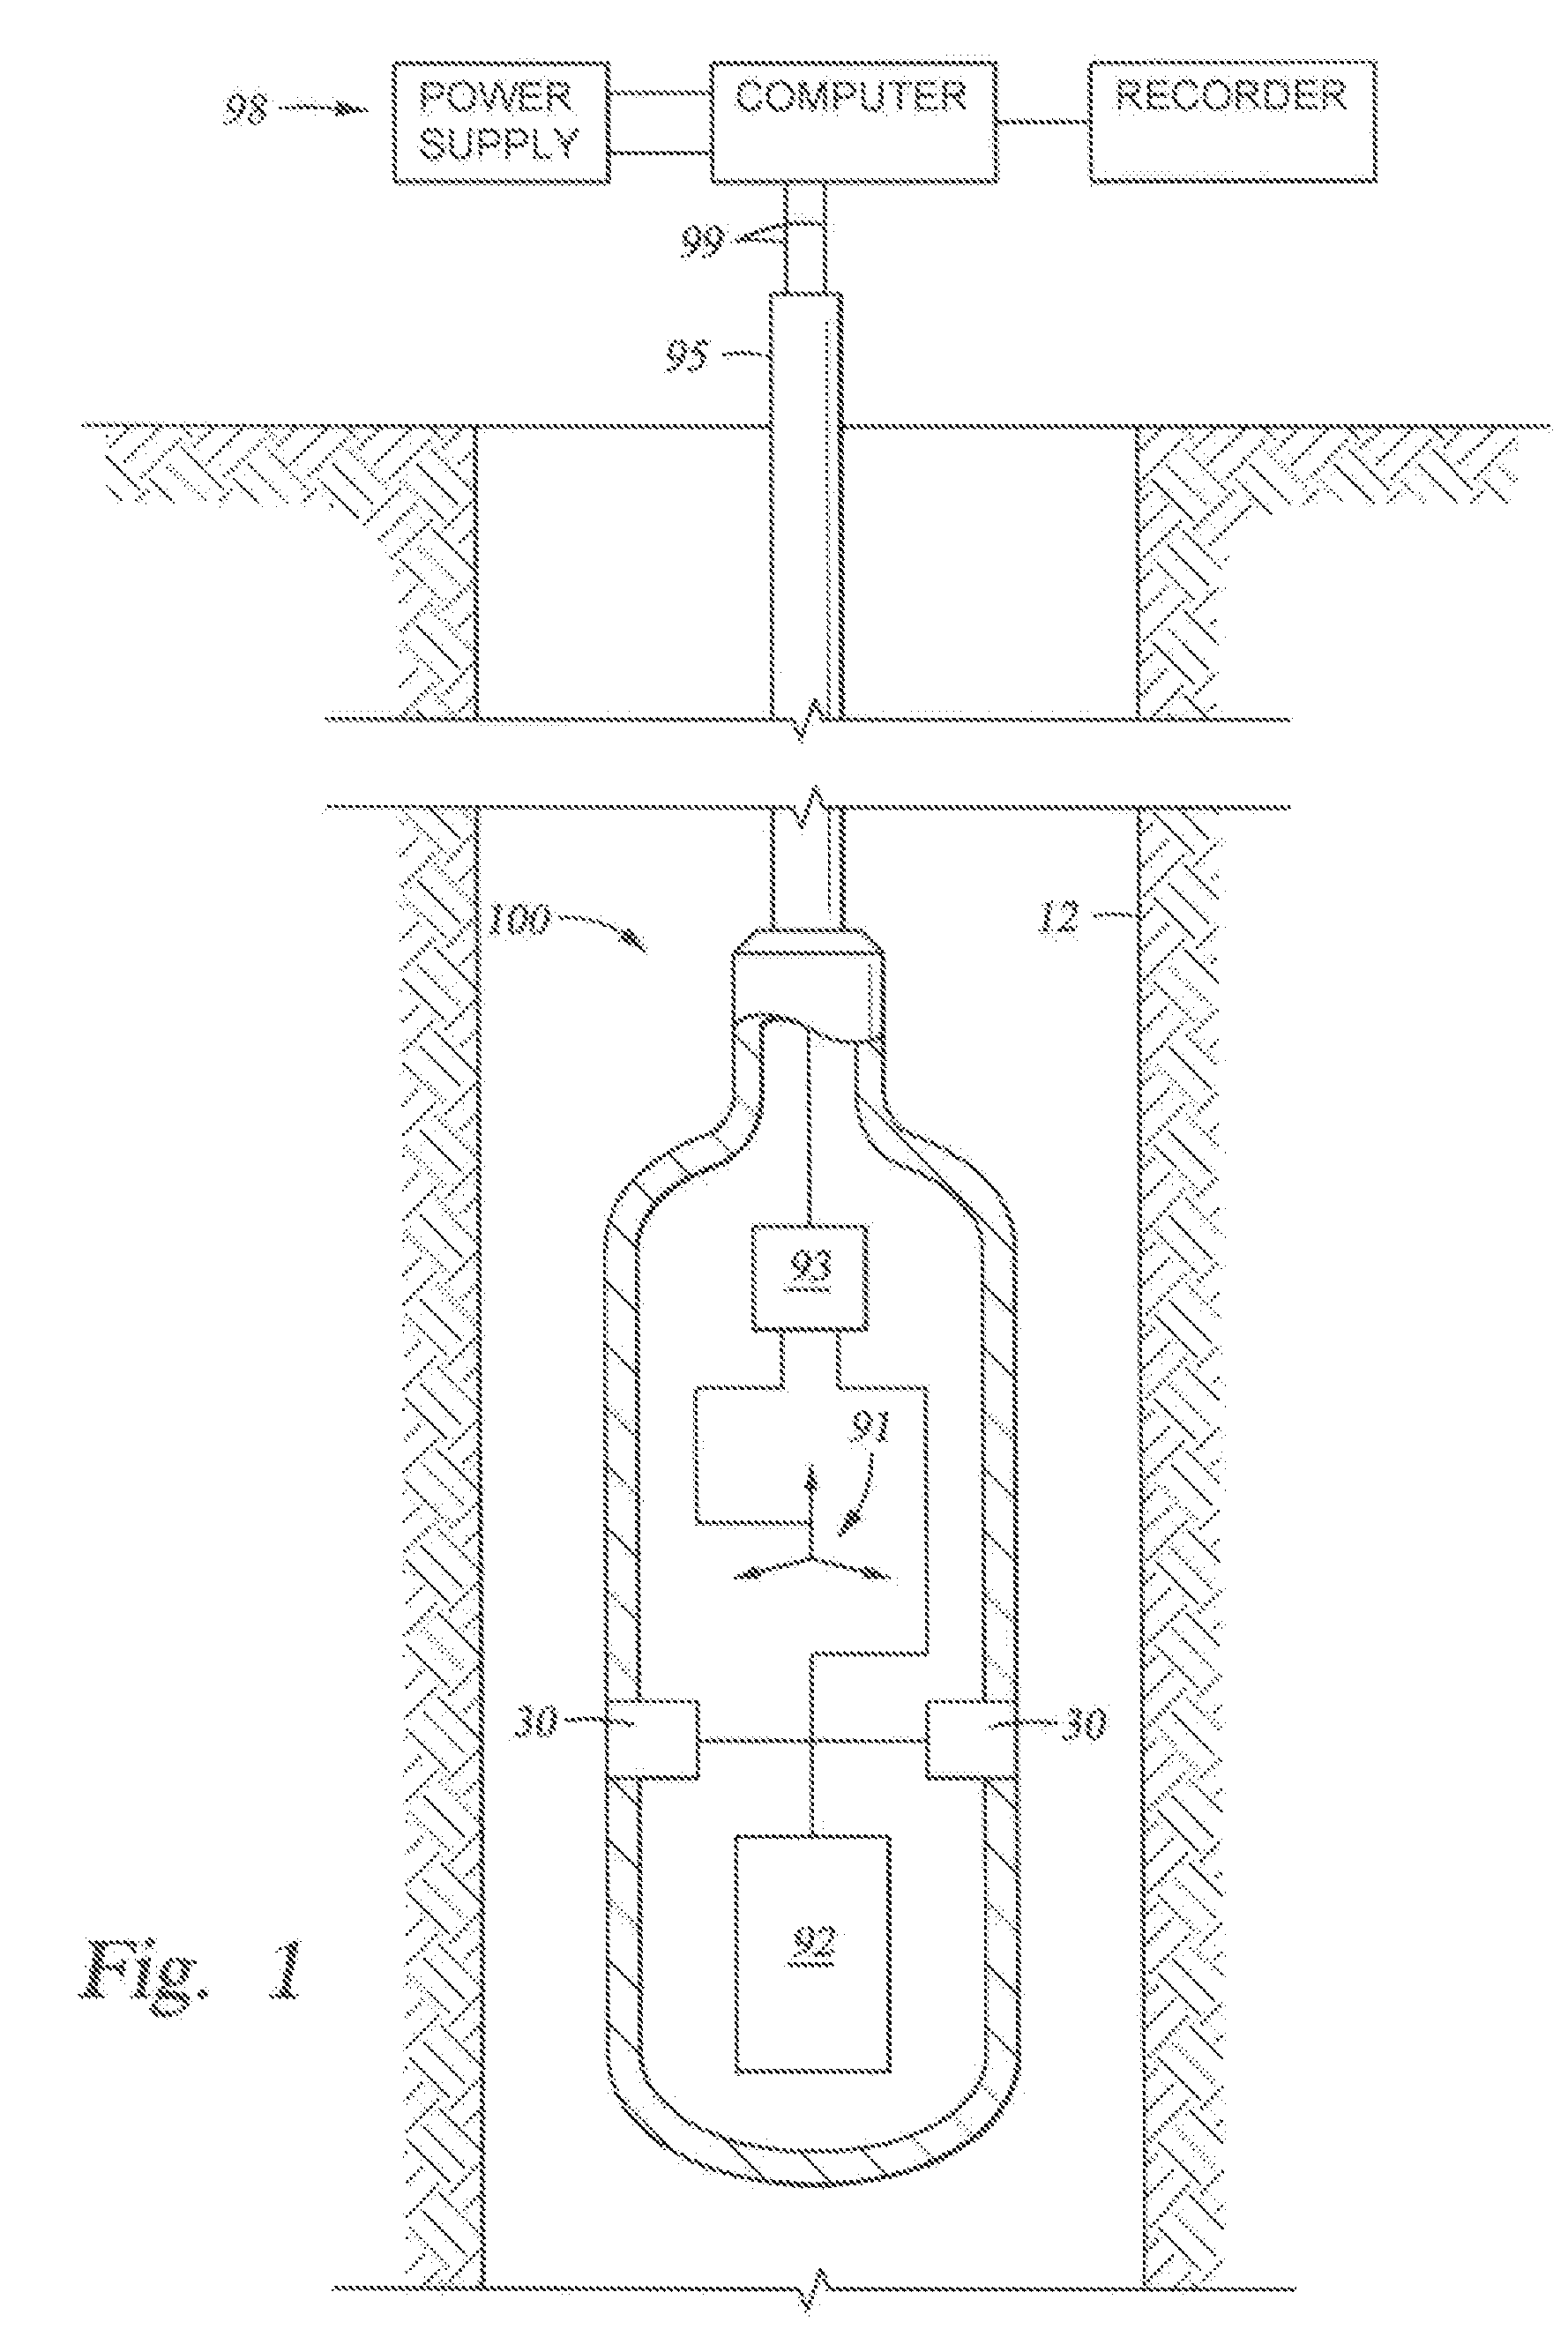 Enclosures for Containing Transducers and Electronics on a Downhole Tool